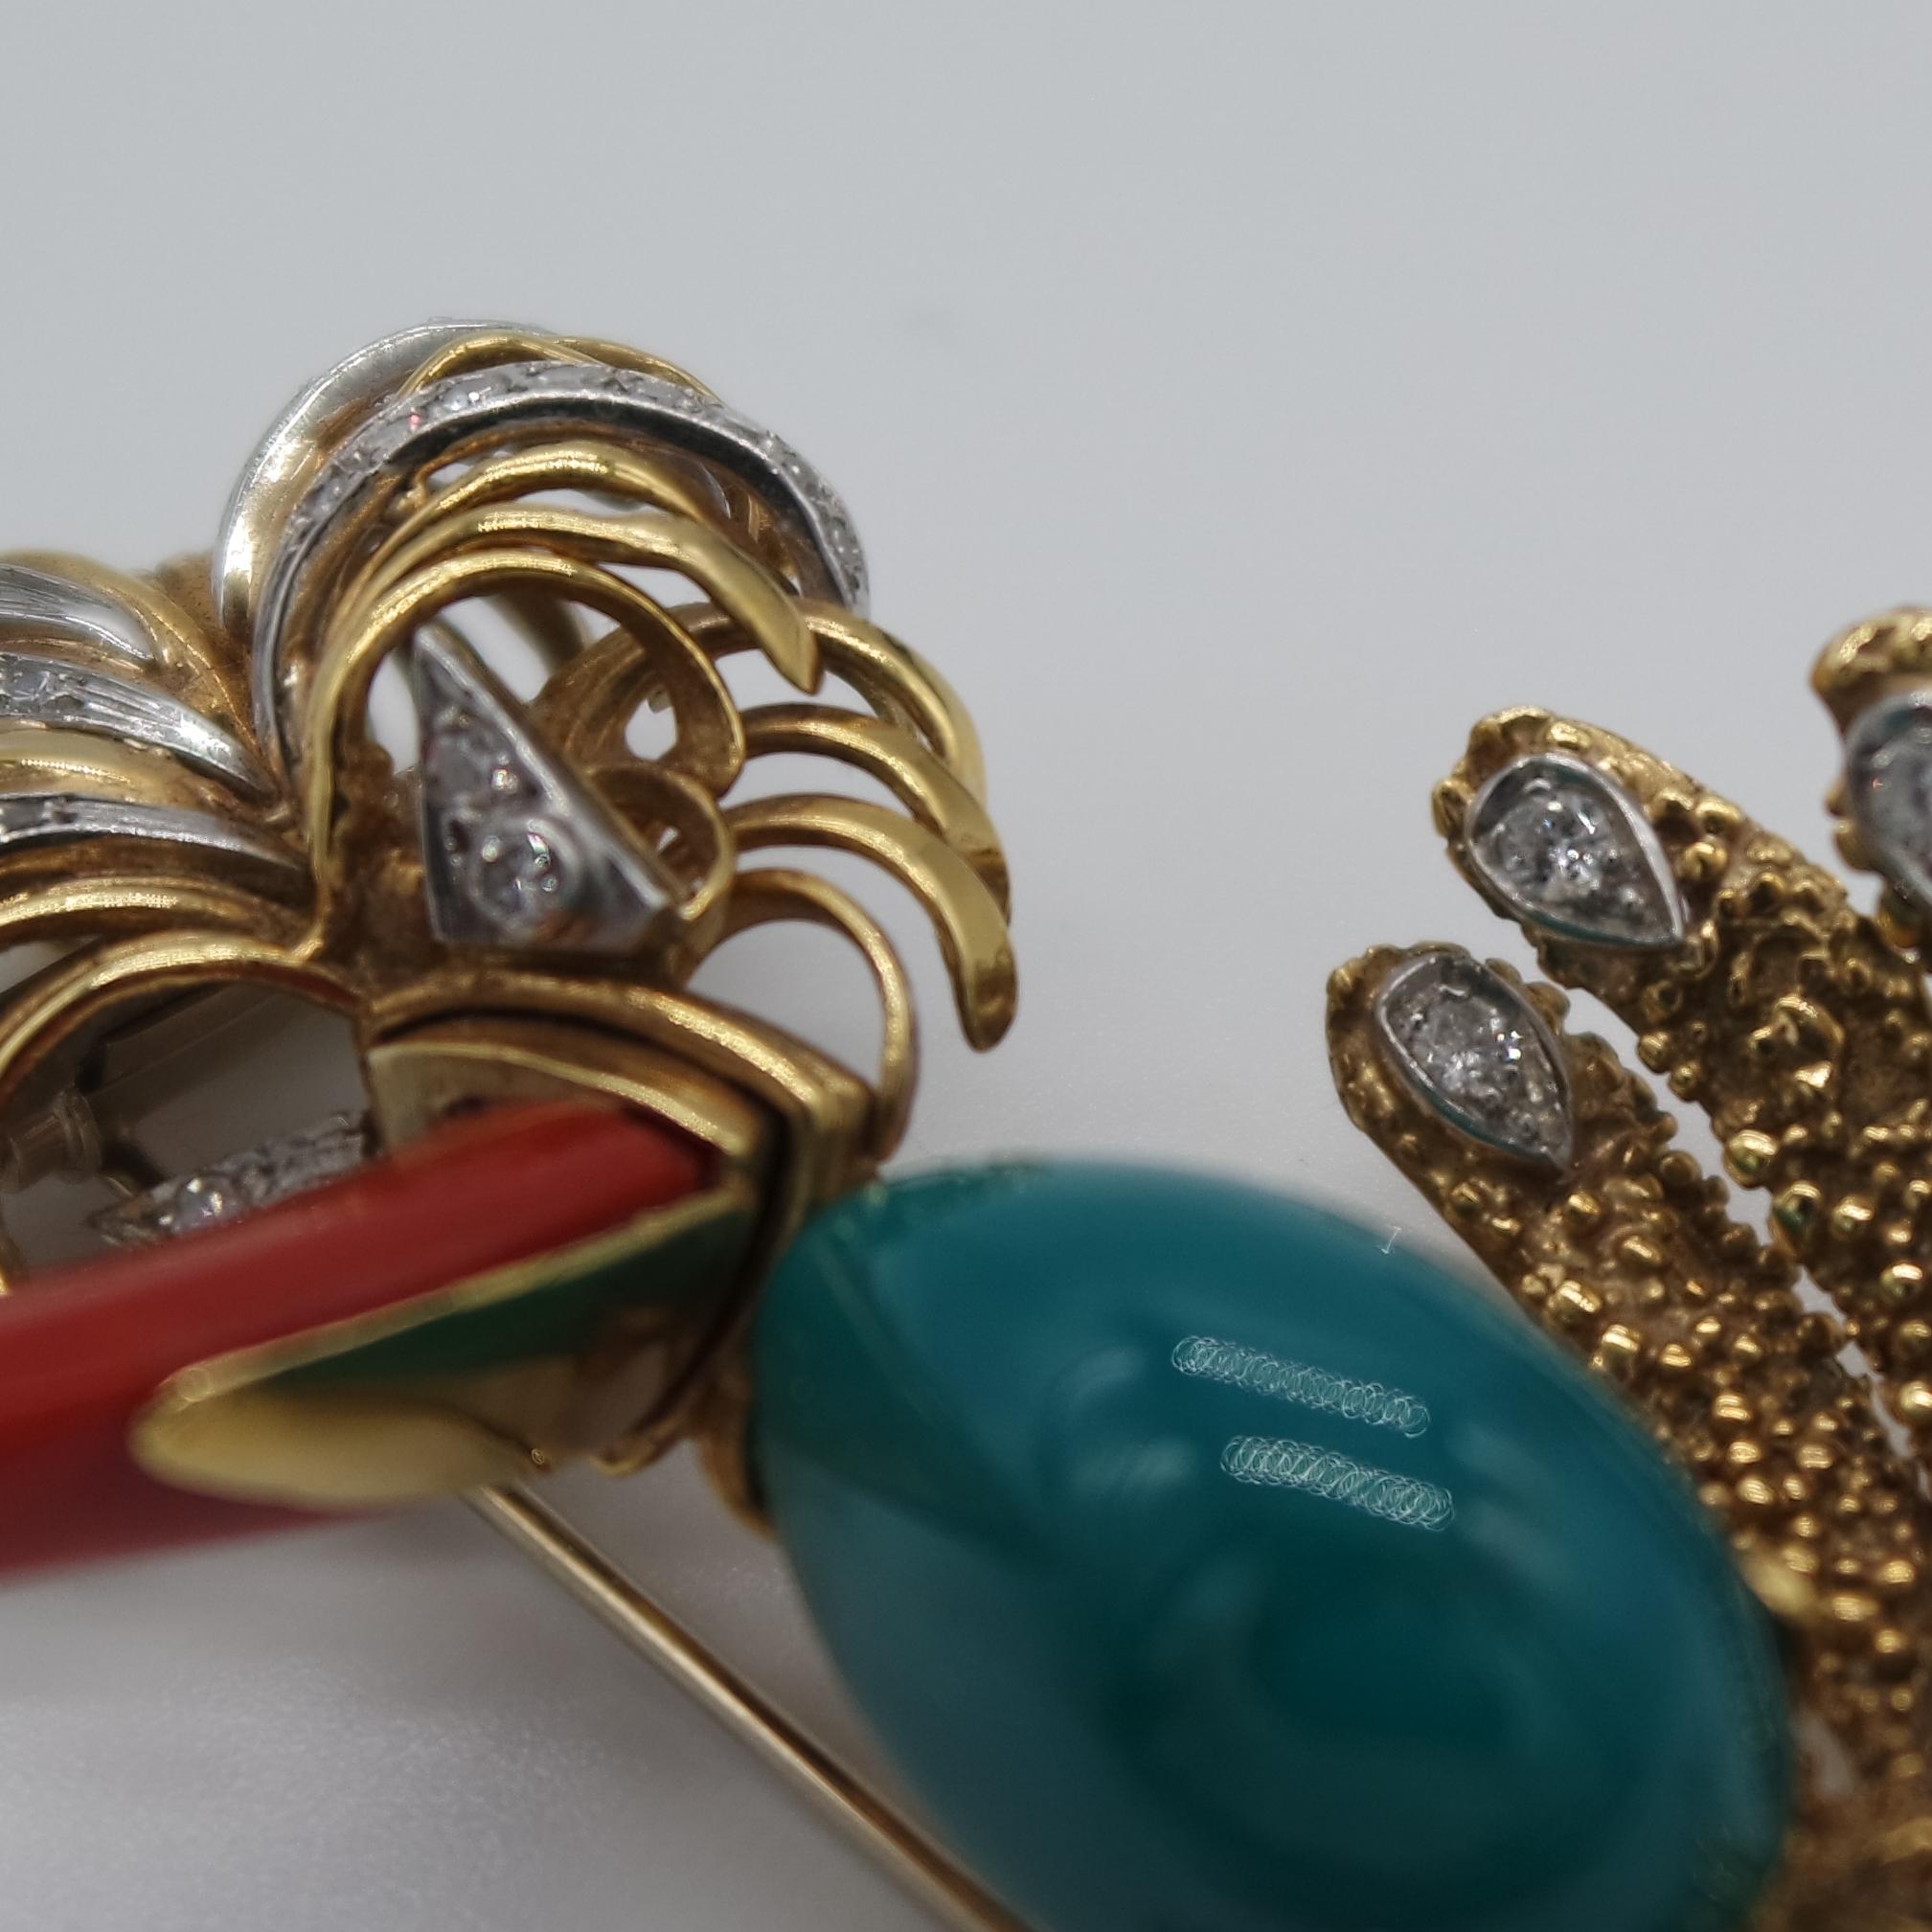 This brooch is an original creation depicting an hoopoe with a red Mediterranean coral beak, a cabochon turquoise body and some round brilliant together with  huit huit cut diamonds. The creative work is gorgeous and ironic, and we believe this